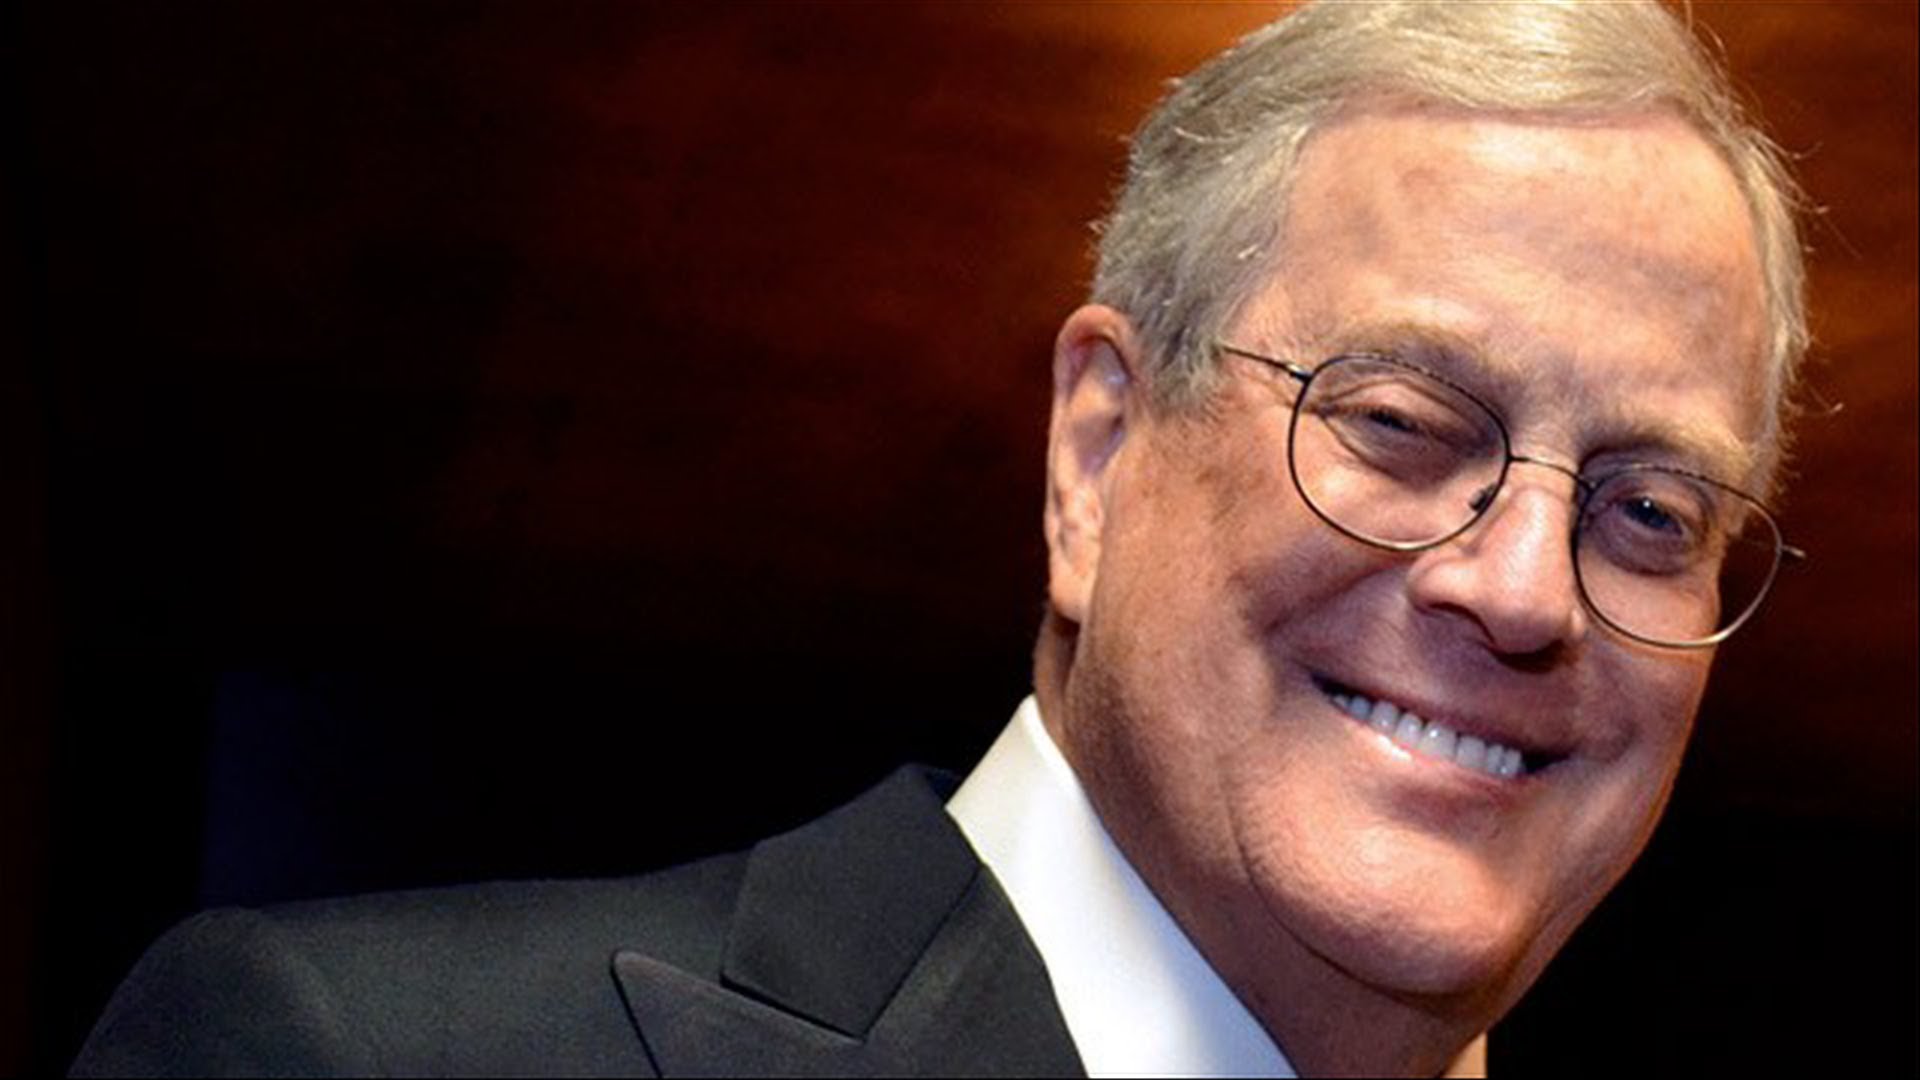 9. At ninth spot is Executive Vice President of Koch Industries, David Koch, who shares majority control of Koch Industries, US' second largest private firm, with his brother Charles Koch. A well-known philanthropist, David is a donor to New York's Lincoln Center and Memorial-Sloan Kettering Cancer Center. The 77-year old lives in New York and has 3 children.